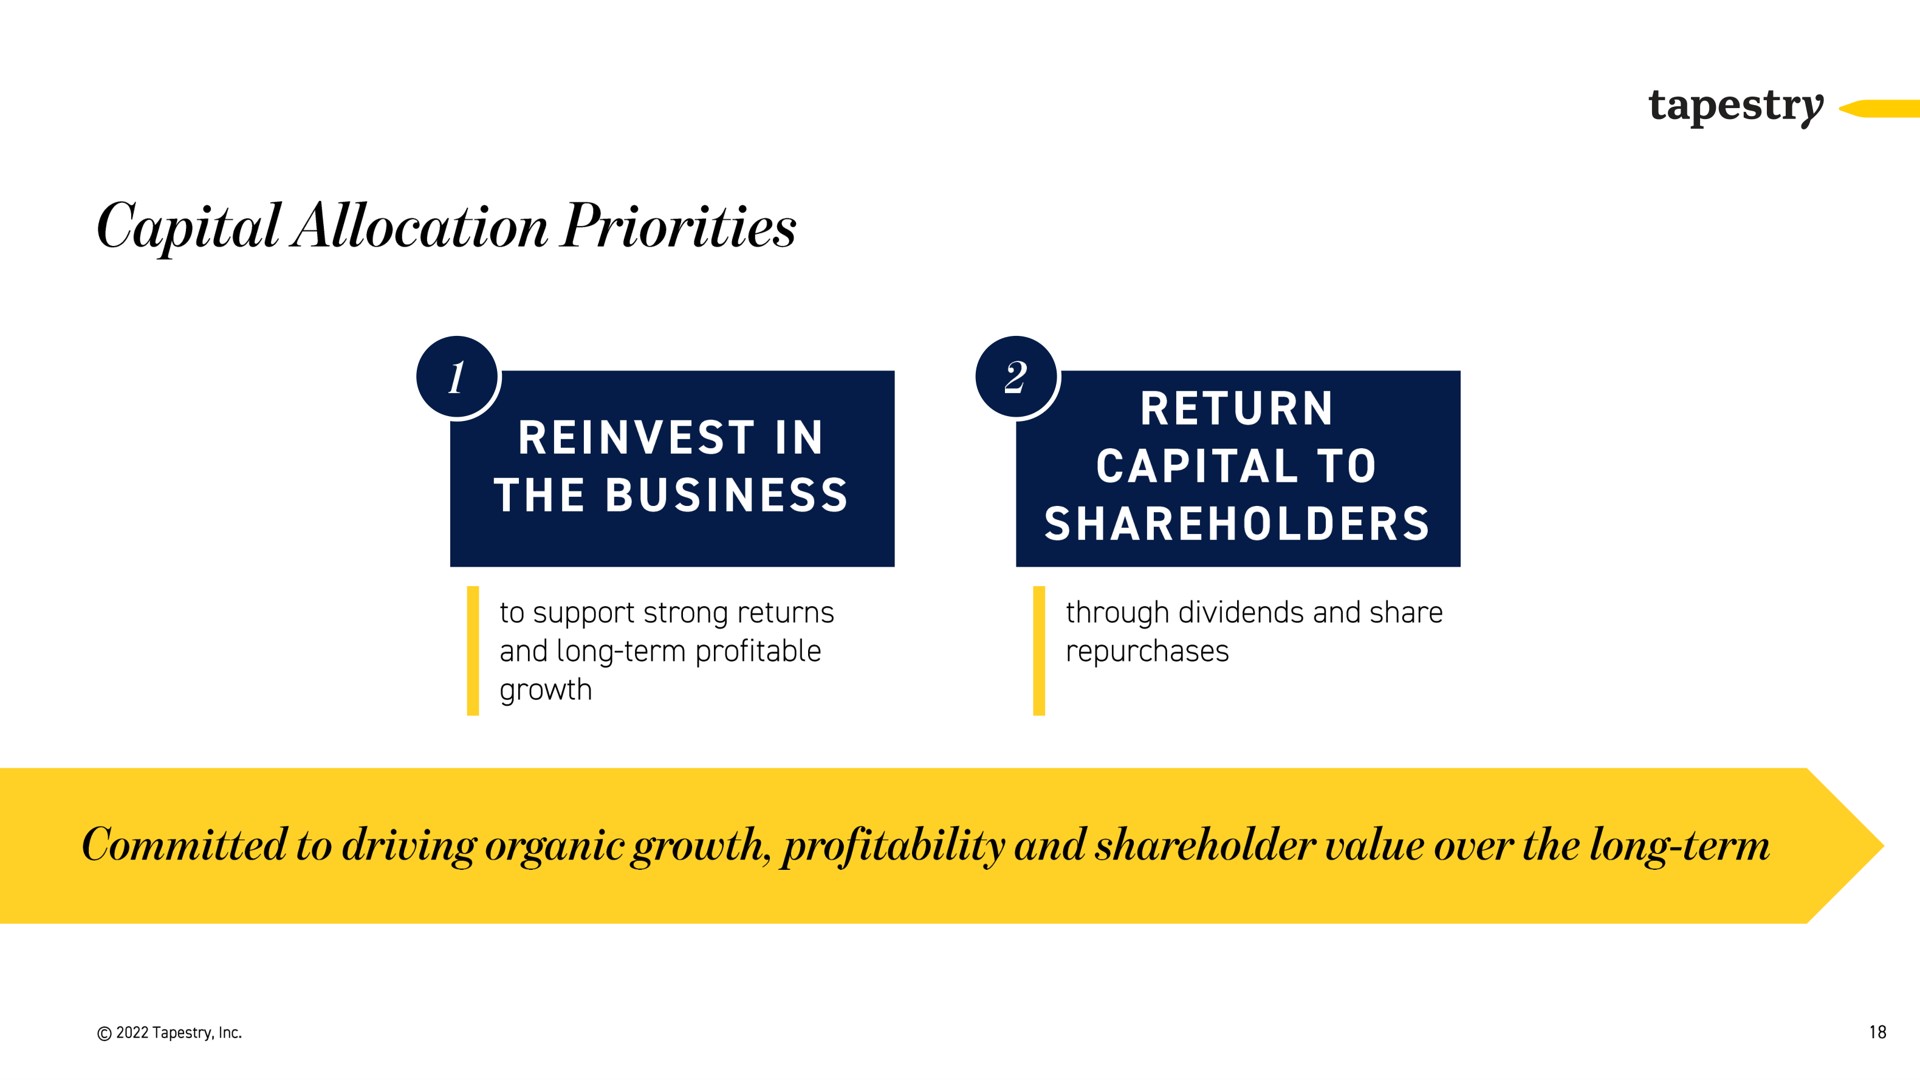 capital allocation priorities capital to shareholders | Tapestry